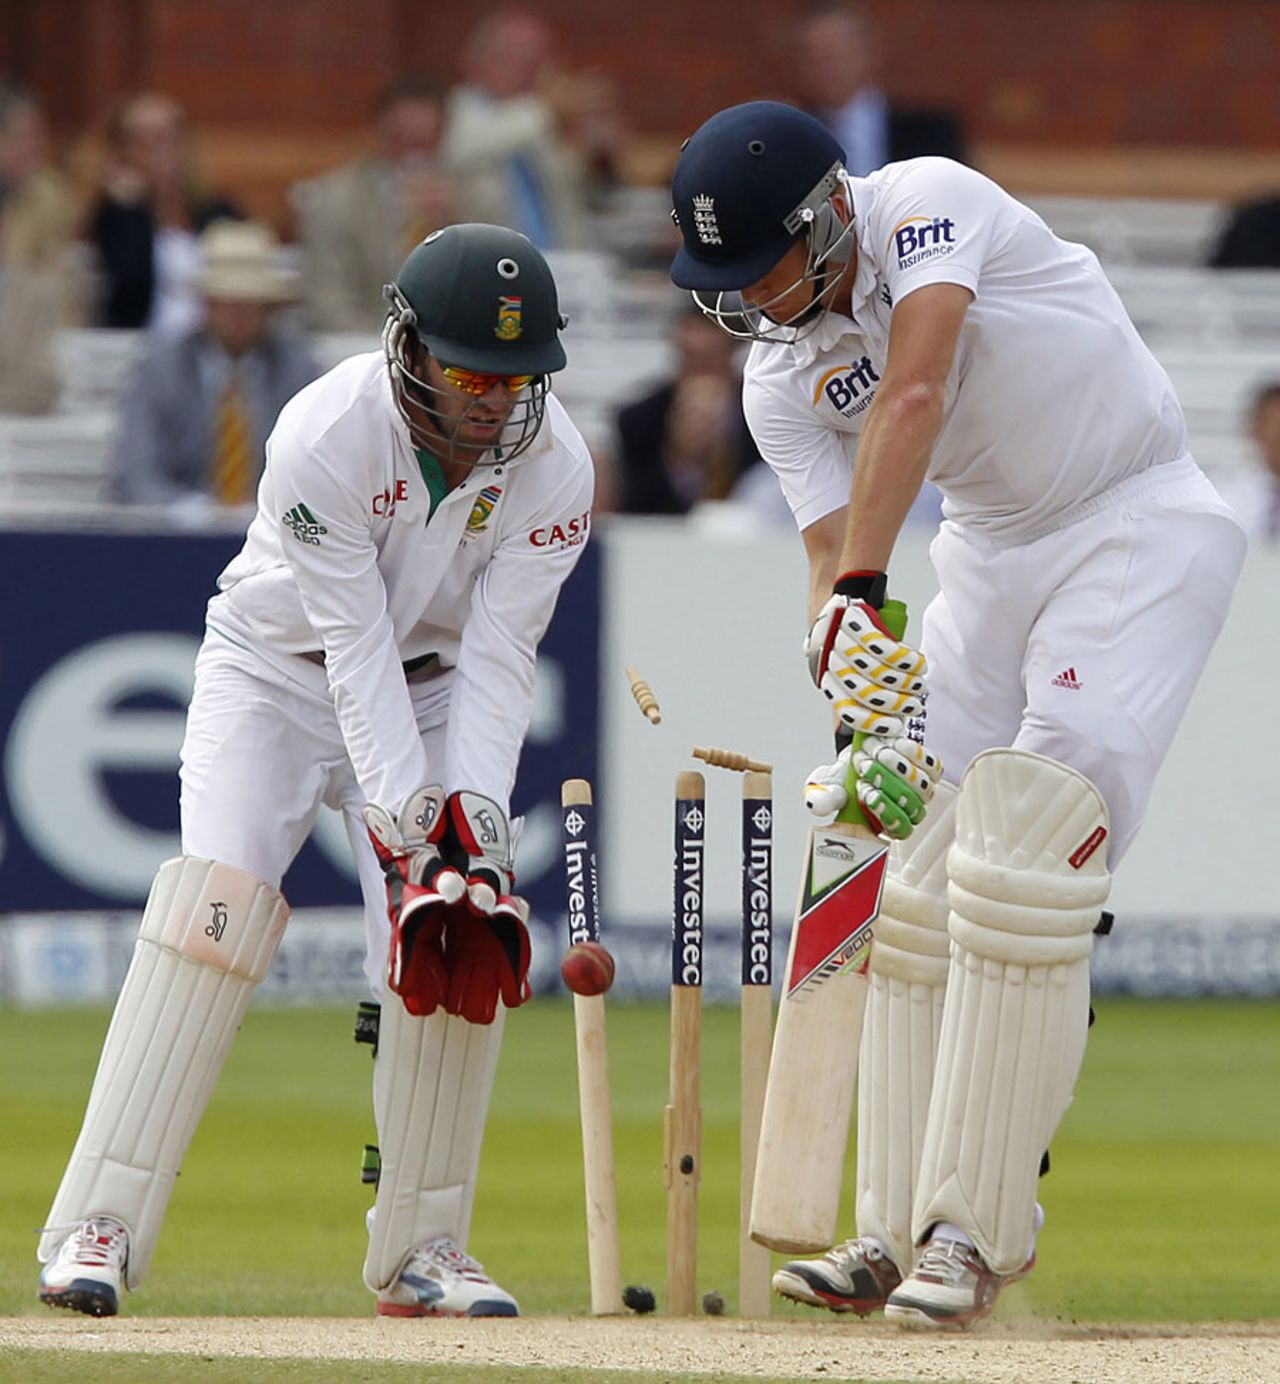 Jonny Bairstow was bowled by Imran Tahir after a rapid fifty, England v South Africa, 3rd Investec Test, Lord's, 5th day, August 20, 2012